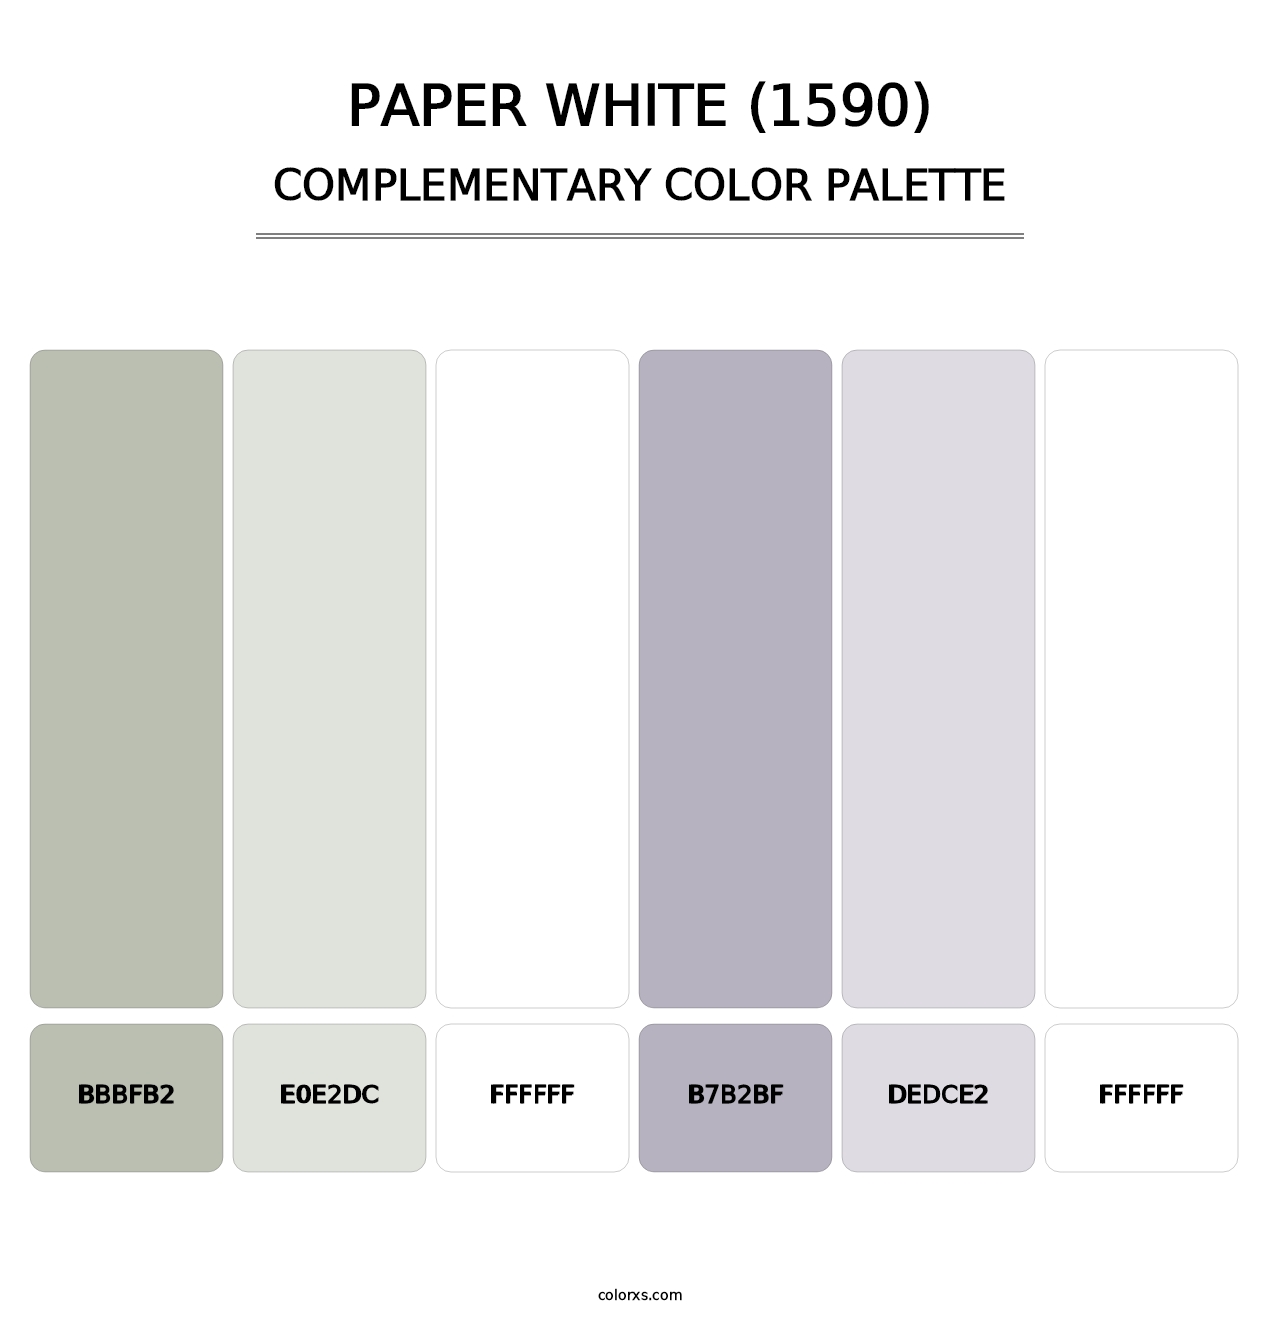 Paper White (1590) - Complementary Color Palette